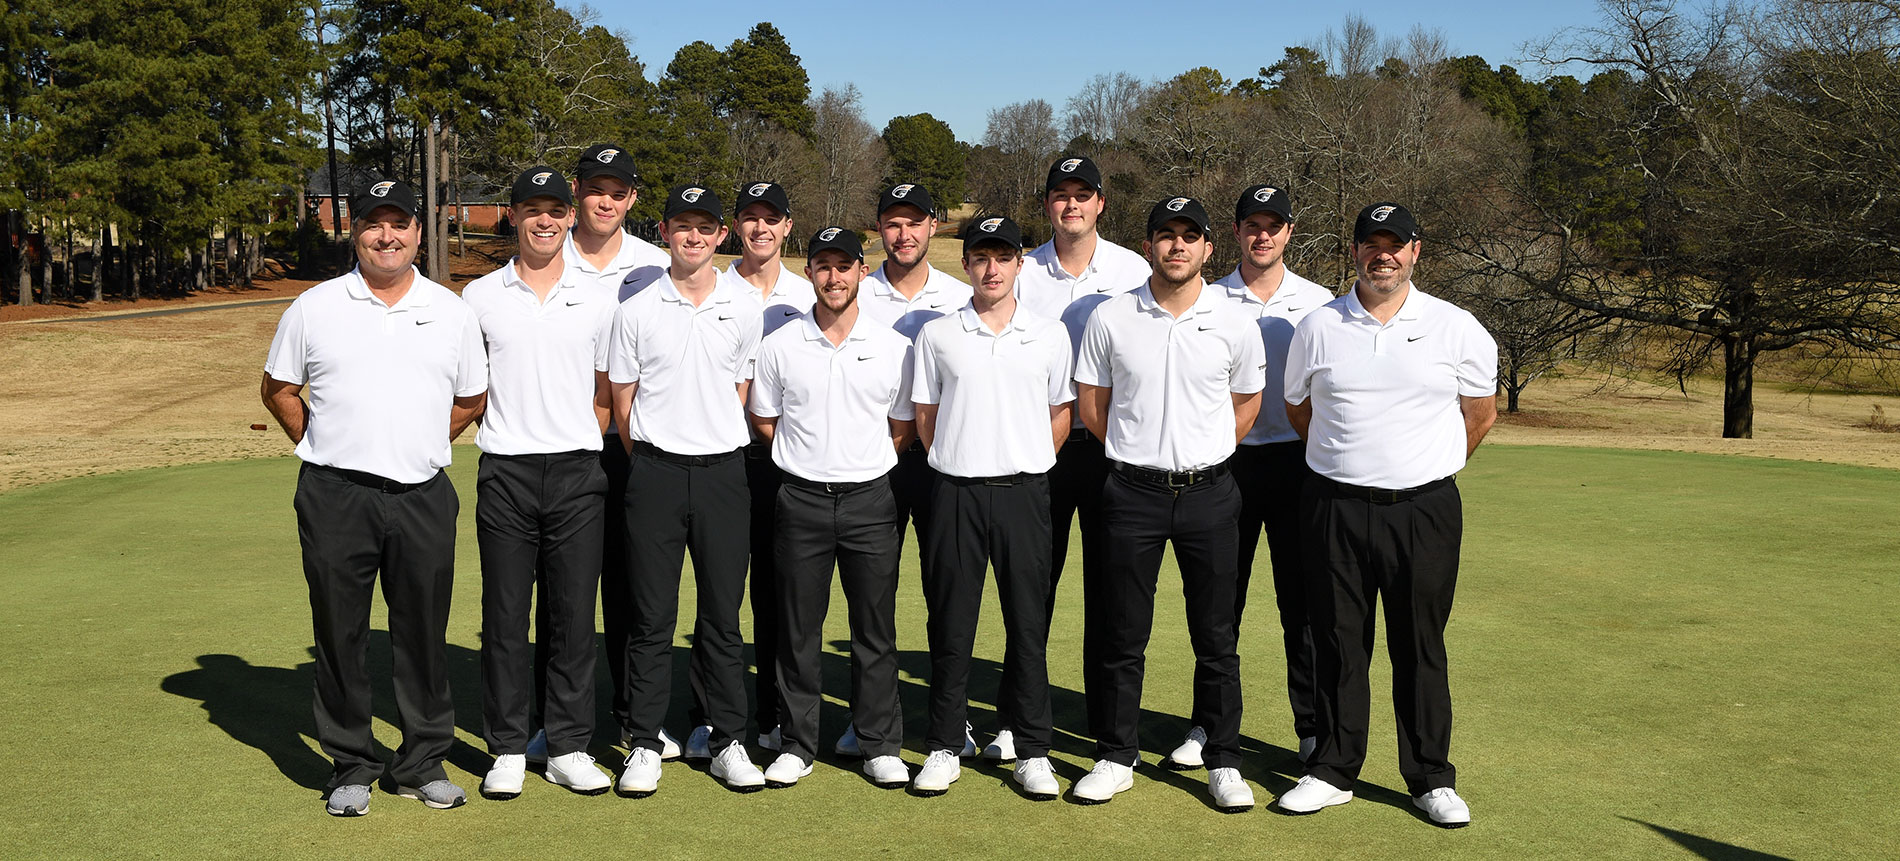 Men’s Golf Tied for 13th Place Midway Through Round Two of Saint Leo Invitational